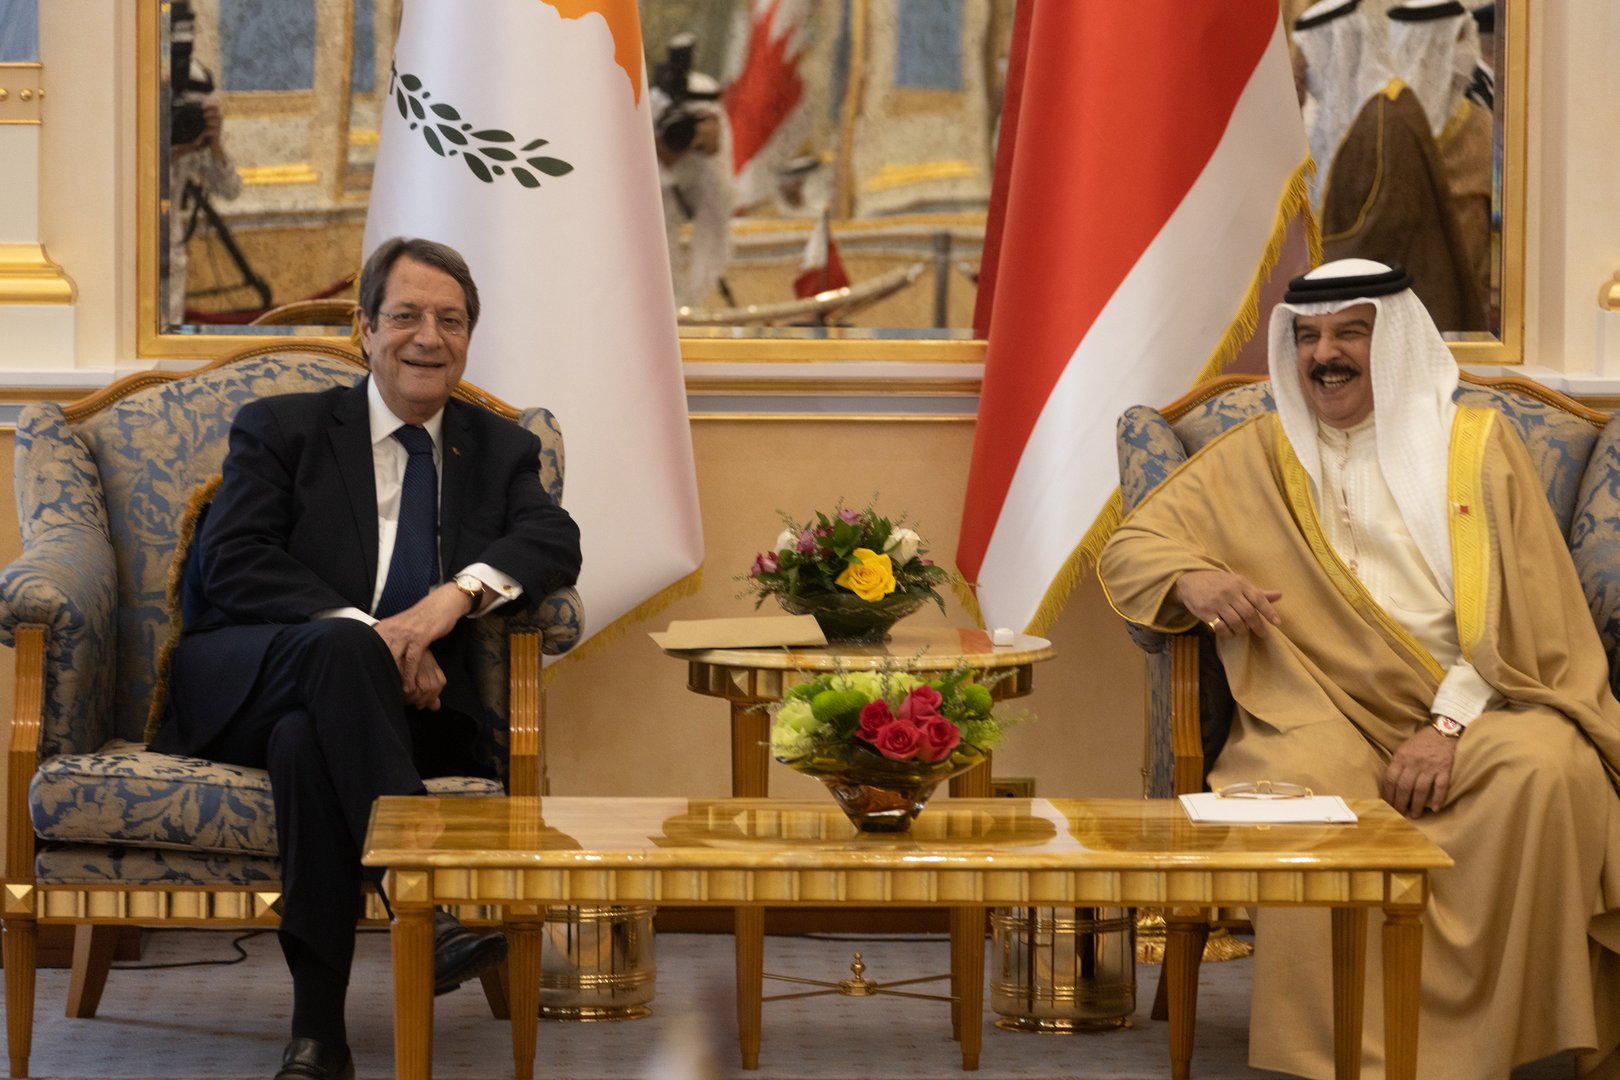 image MoU, agreement signed as Anastasiades visits Bahrain